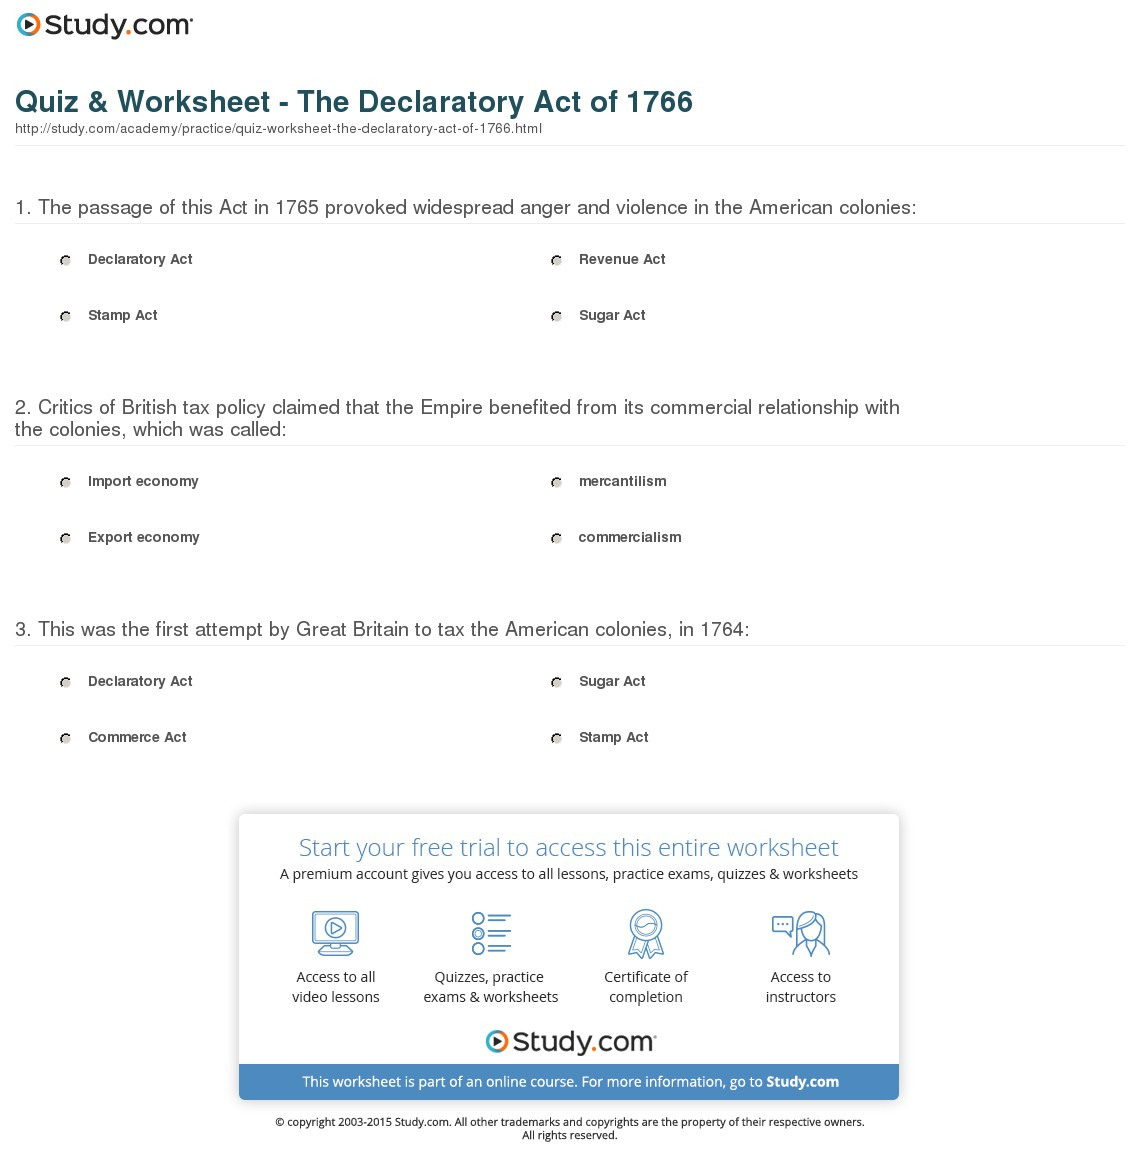 quiz-worksheet-the-declaratory-act-of-1766-study-db-excel